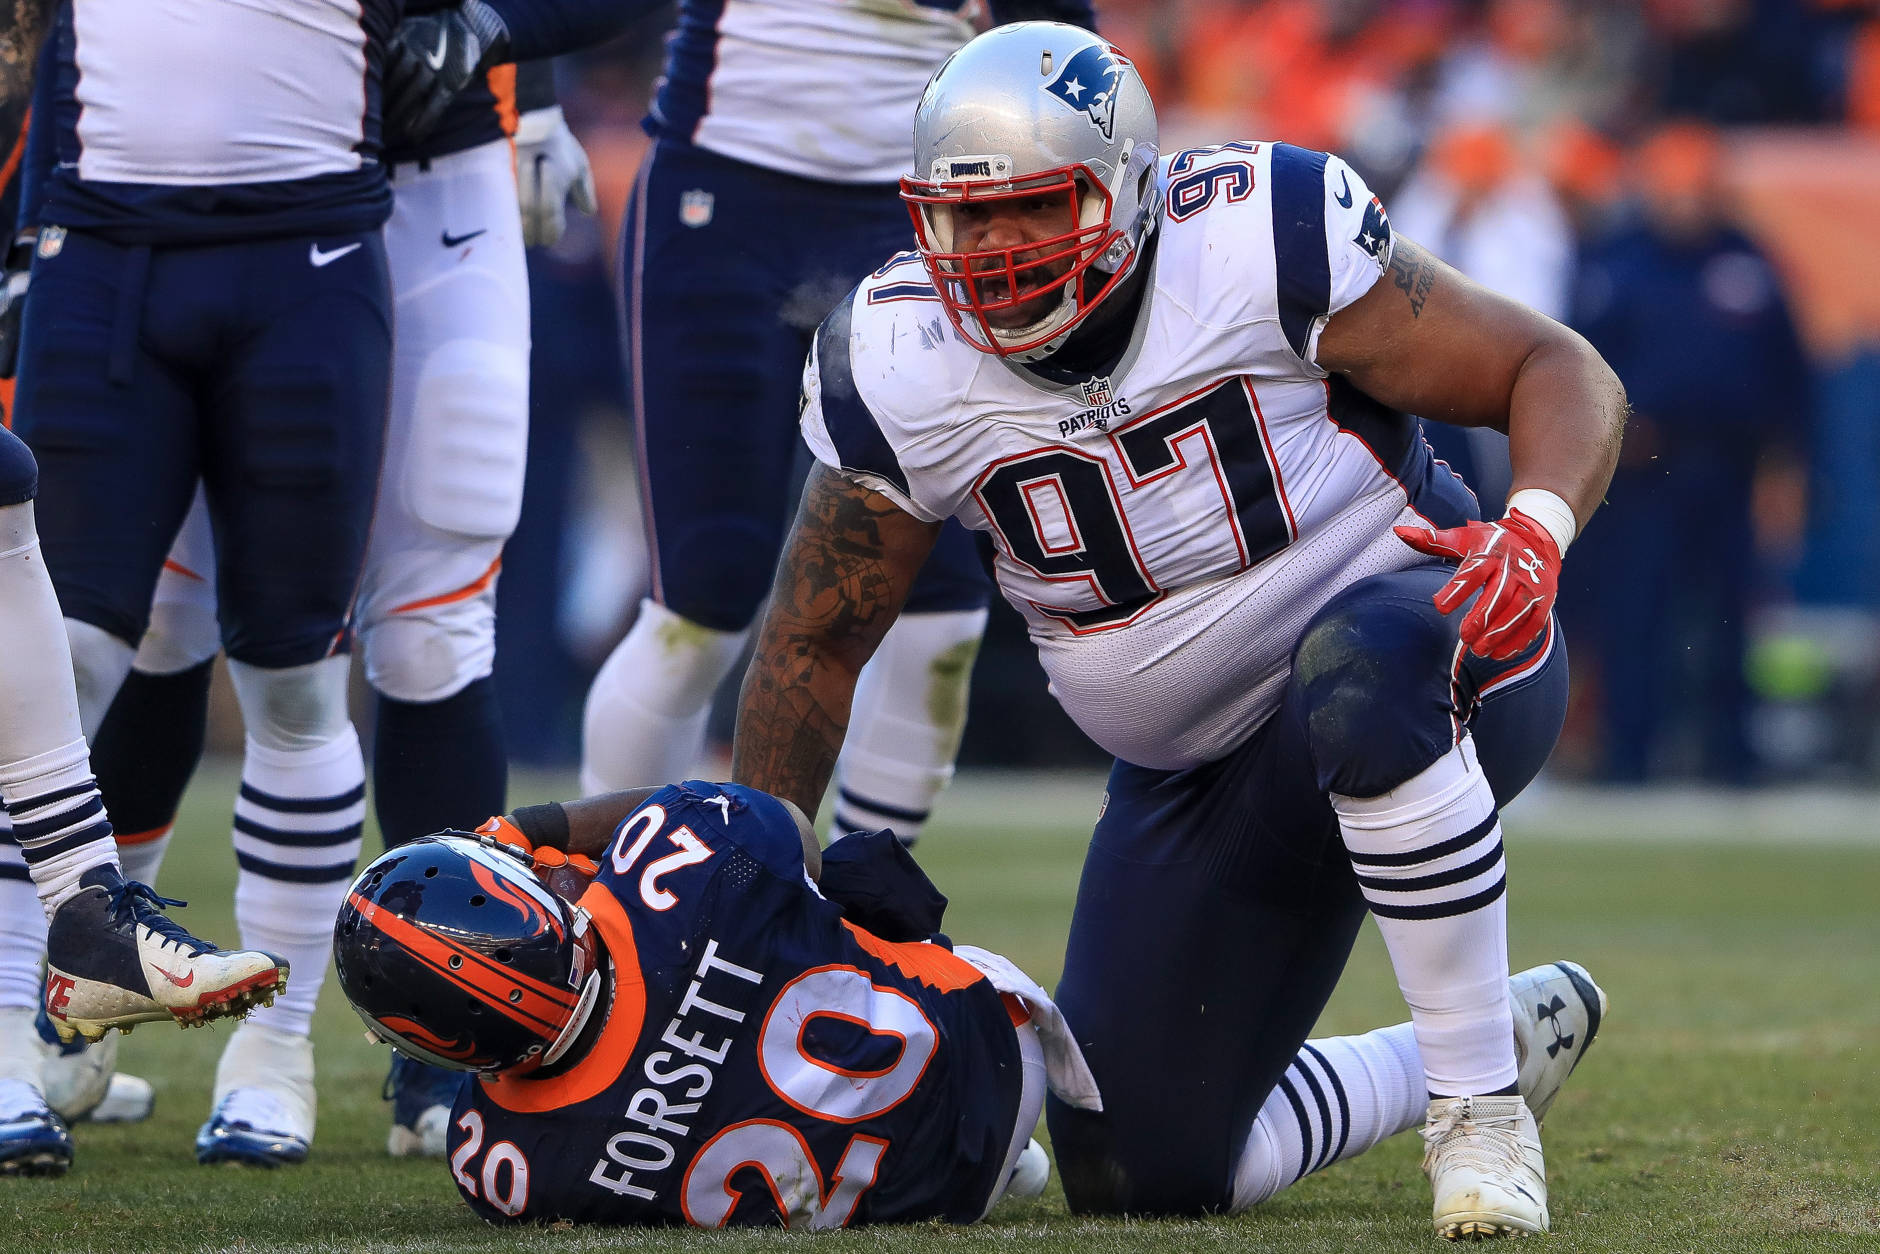 DENVER, CO - DECEMBER 18:  Defensive tackle Alan Branch #97 of the New England Patriots stands up after tackling running back Justin Forsett #20 of the Denver Broncos at Sports Authority Field at Mile High on December 18, 2016 in Denver, Colorado. (Photo by Sean M. Haffey/Getty Images)